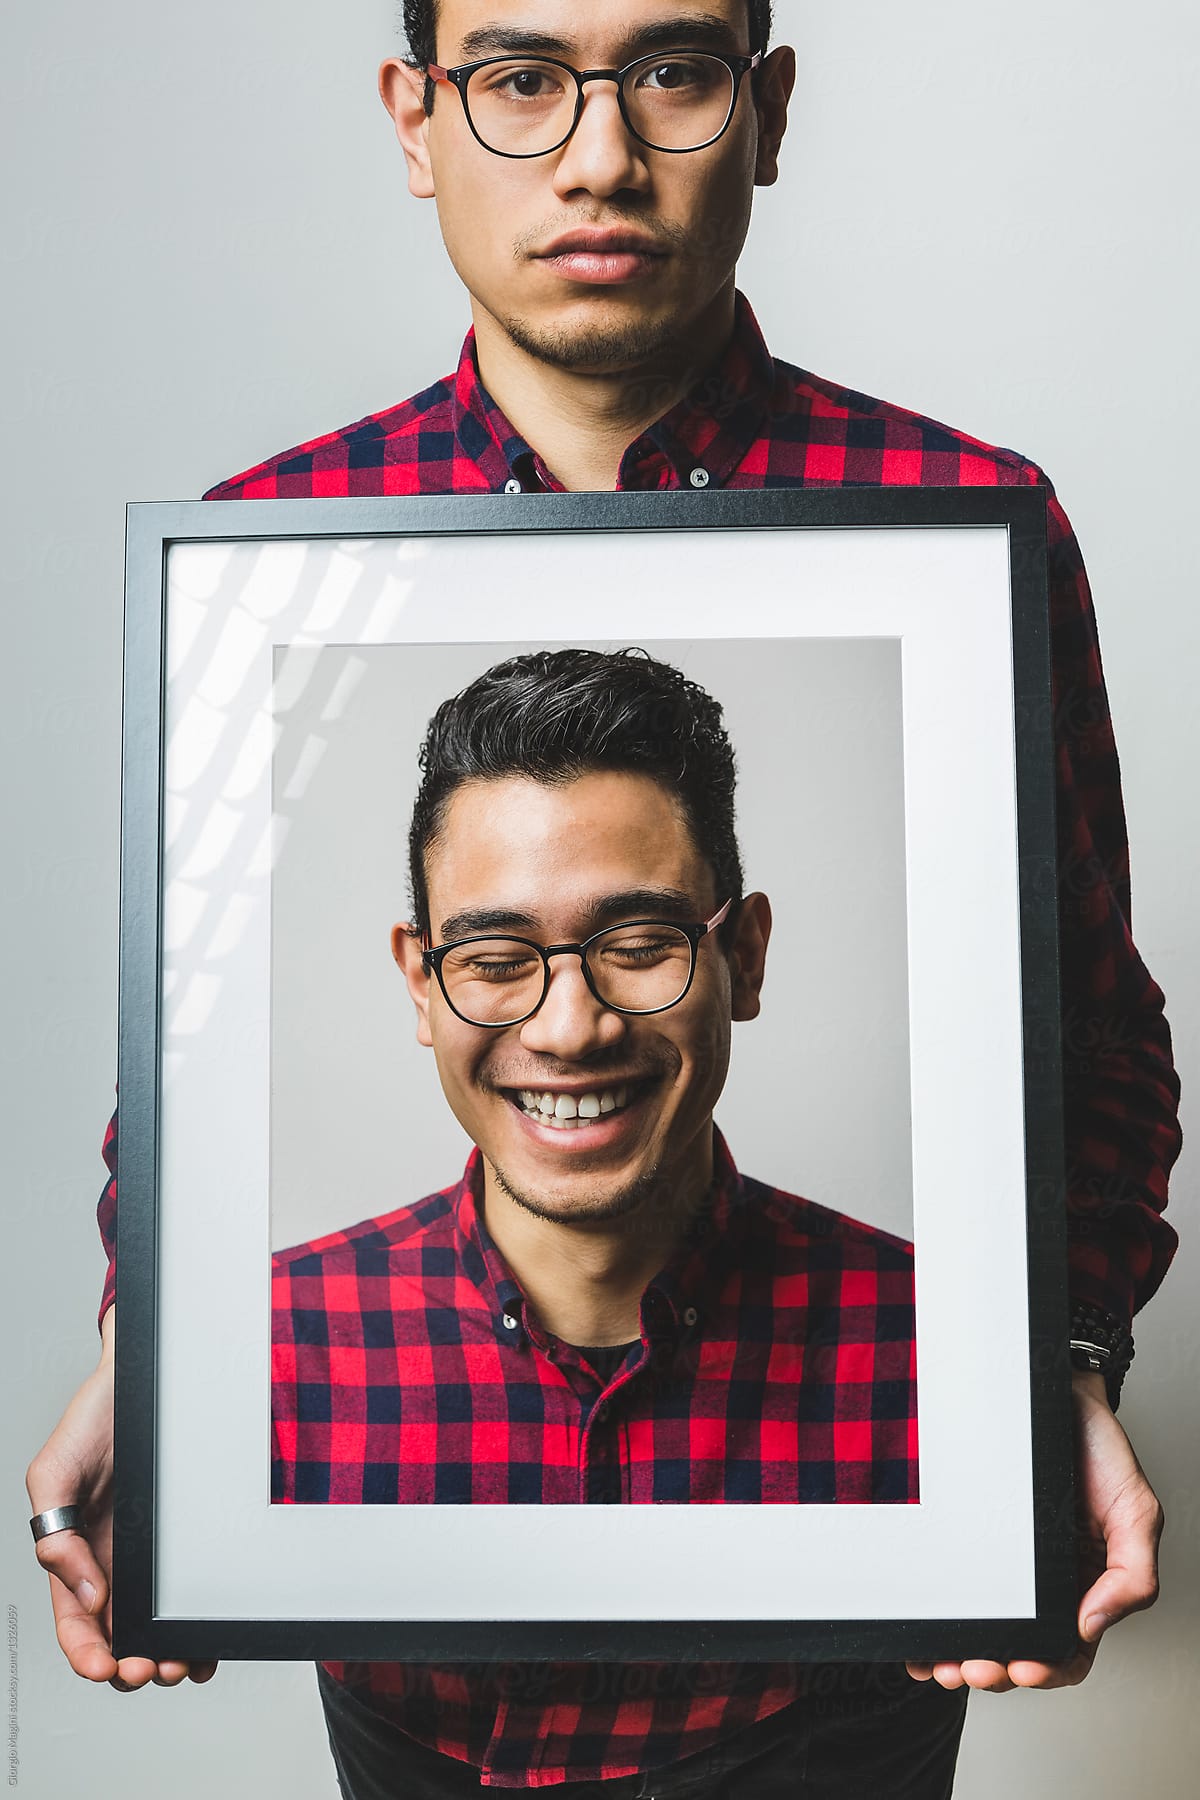 Young Creative Man Showing a Smiling Portrait of Himself